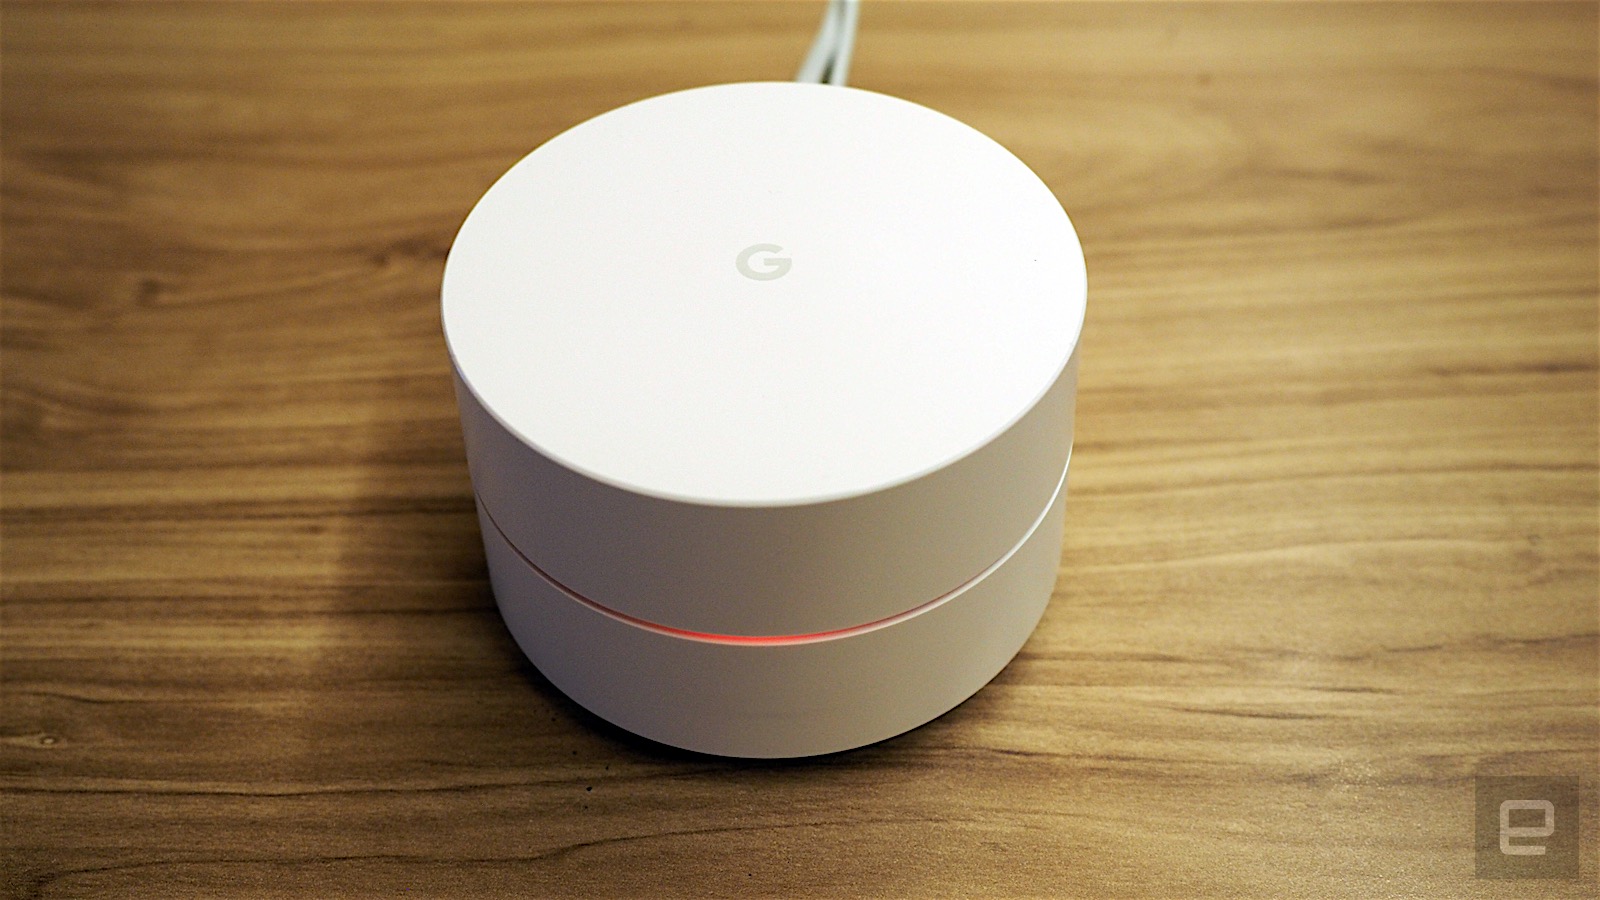 Google Wifi Review A Hassle Free Router Comes At A Price